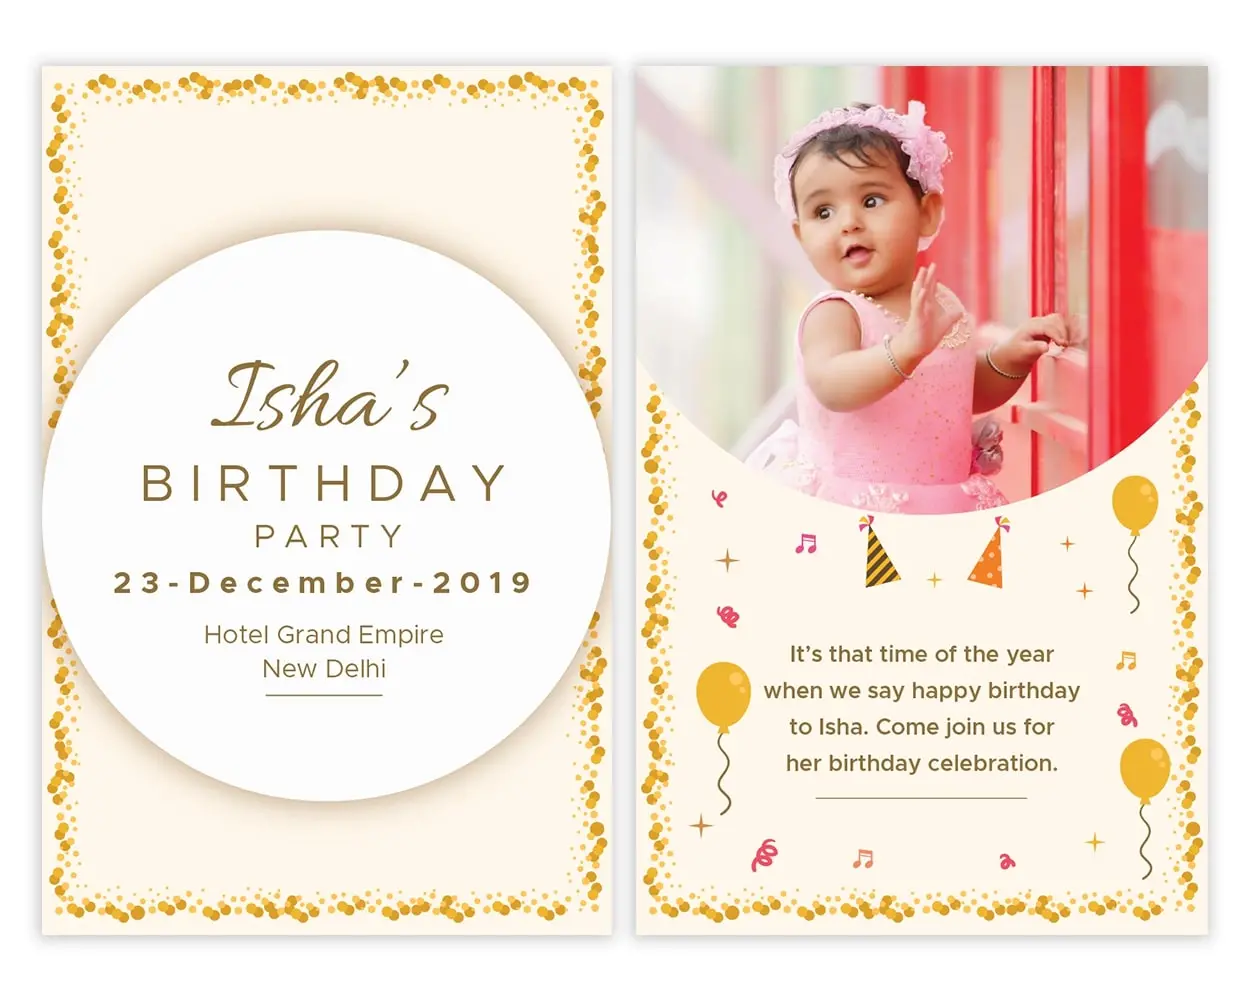 All Sides of Design Number 5 for Invitation Cards for Birthday Parties